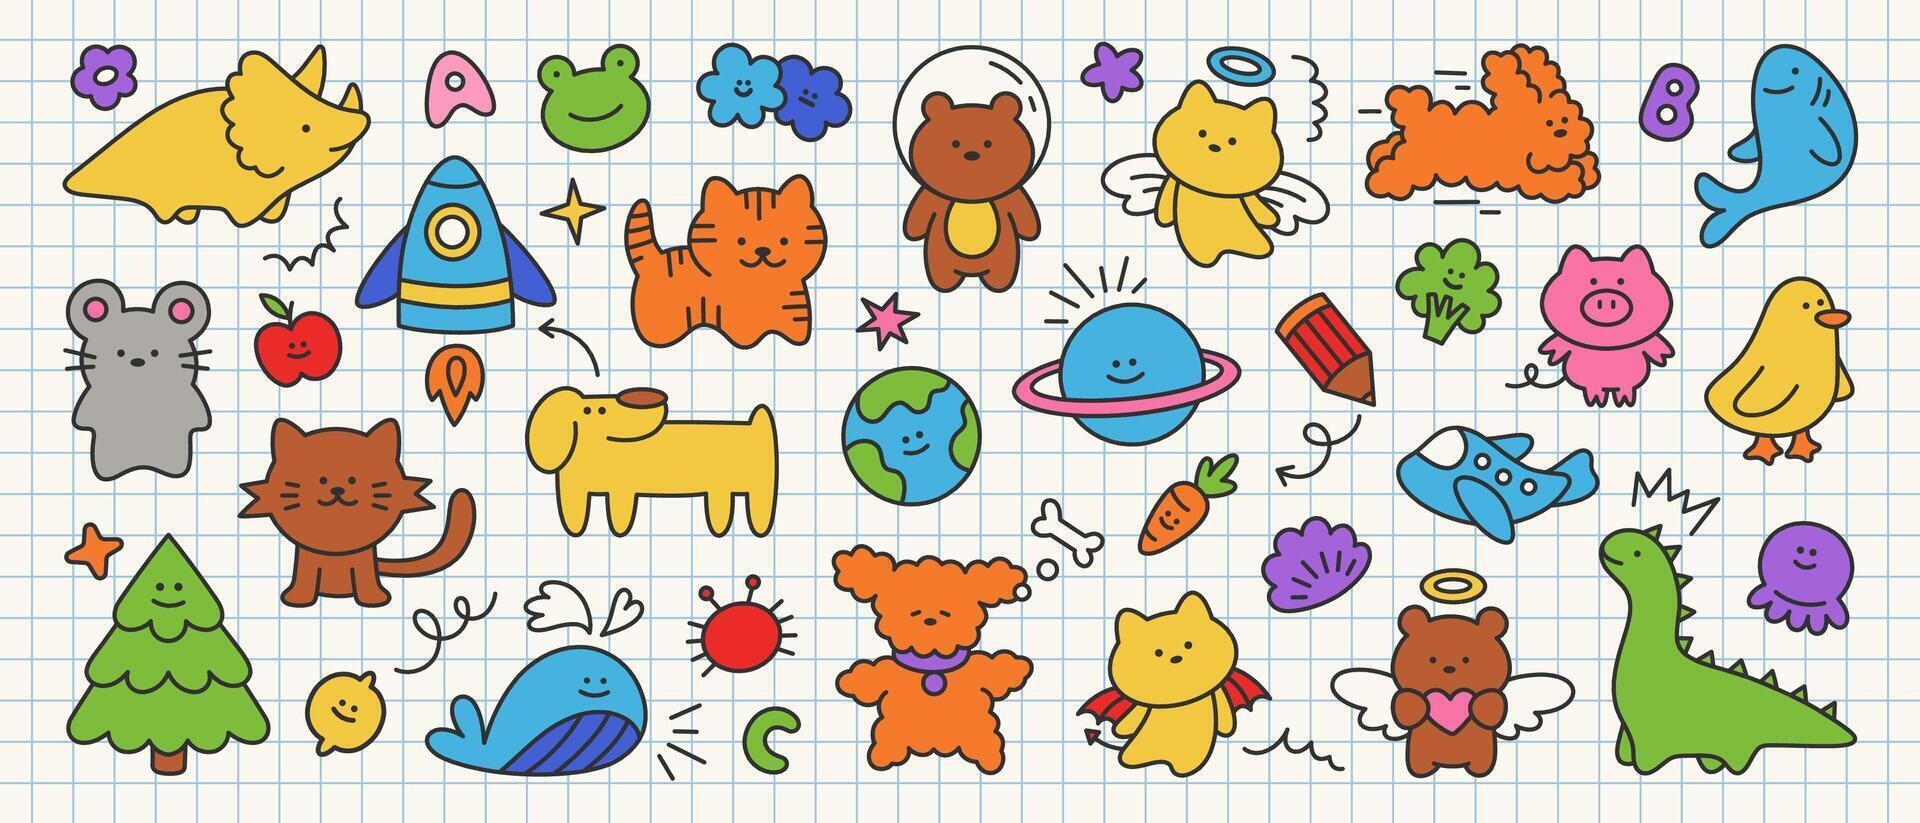 Cute kid icons collection of planet, dinosaur, animal, fruit, star, whale, cloud, letter. Trendy childish doodle set on notebook sheet. Simple scribble vector elements for banner, pattern or sticker.